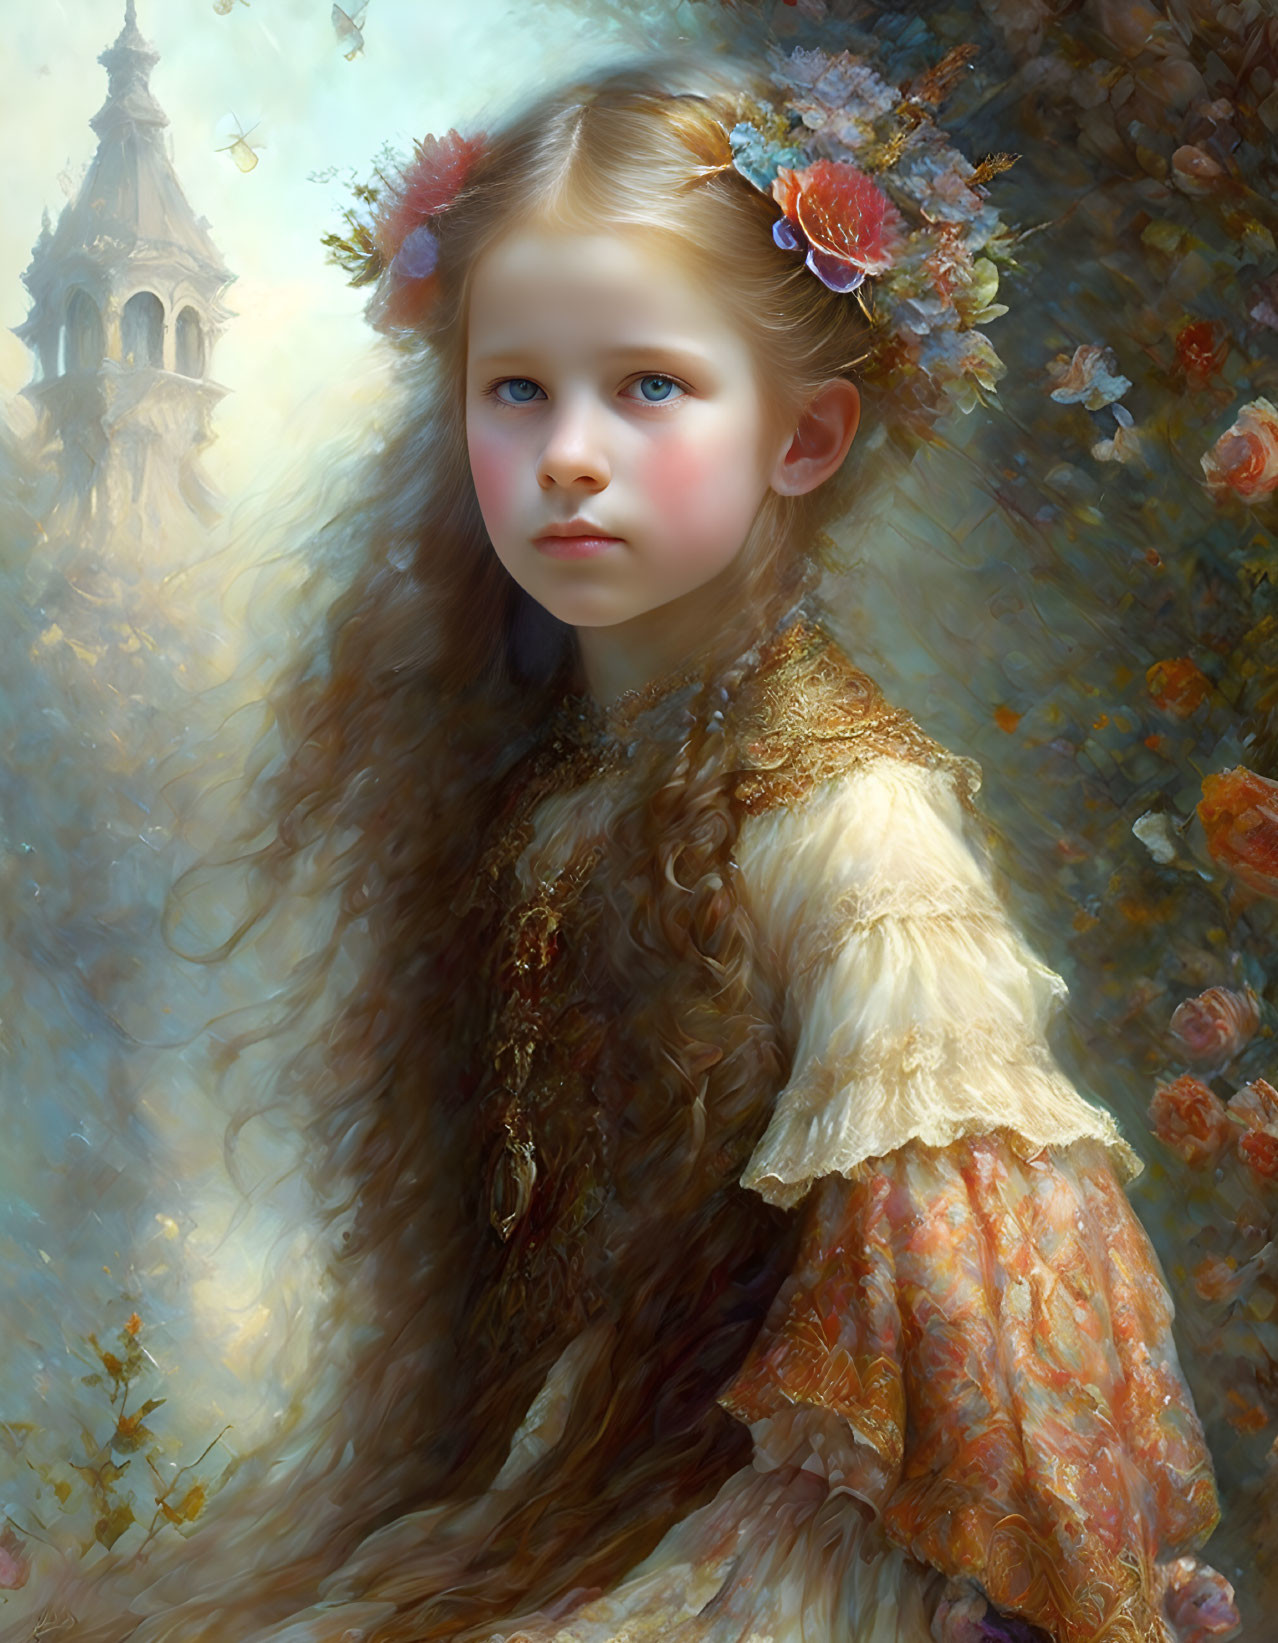 Young girl portrait with blue eyes, floral headpieces, vintage dress, and tower backdrop.